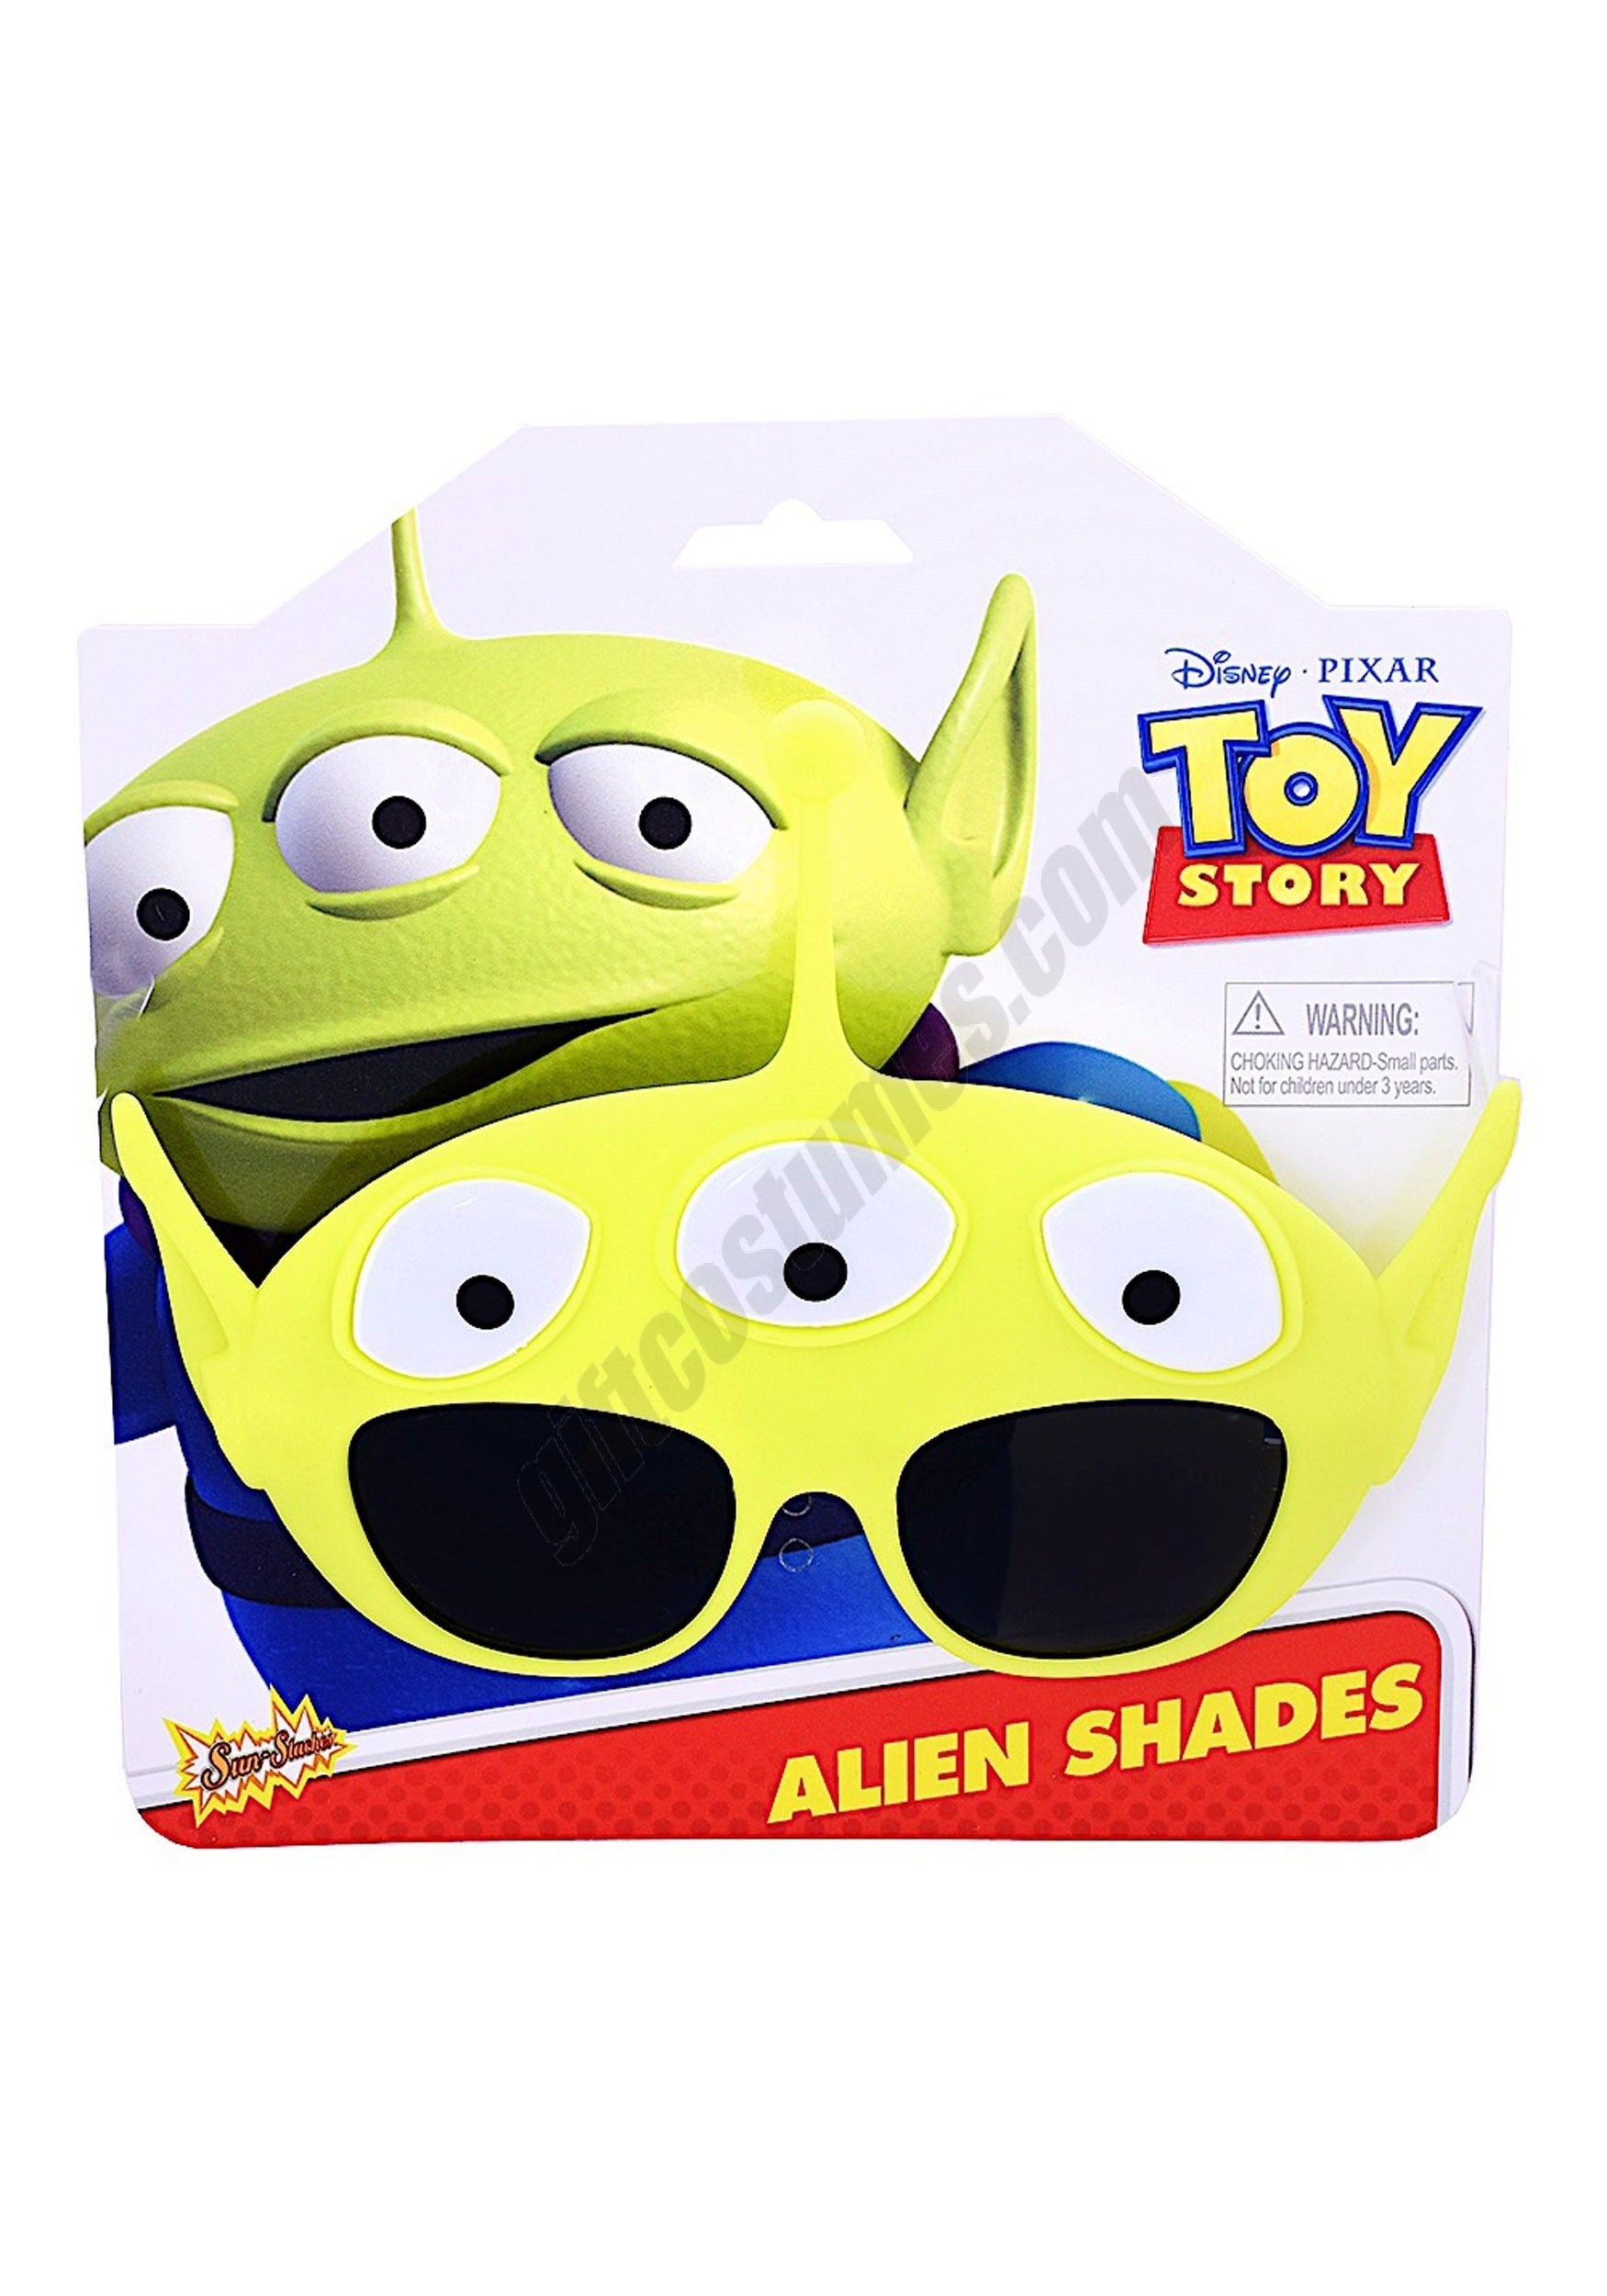 Toy Story Alien Sunglasses Promotions - Toy Story Alien Sunglasses Promotions